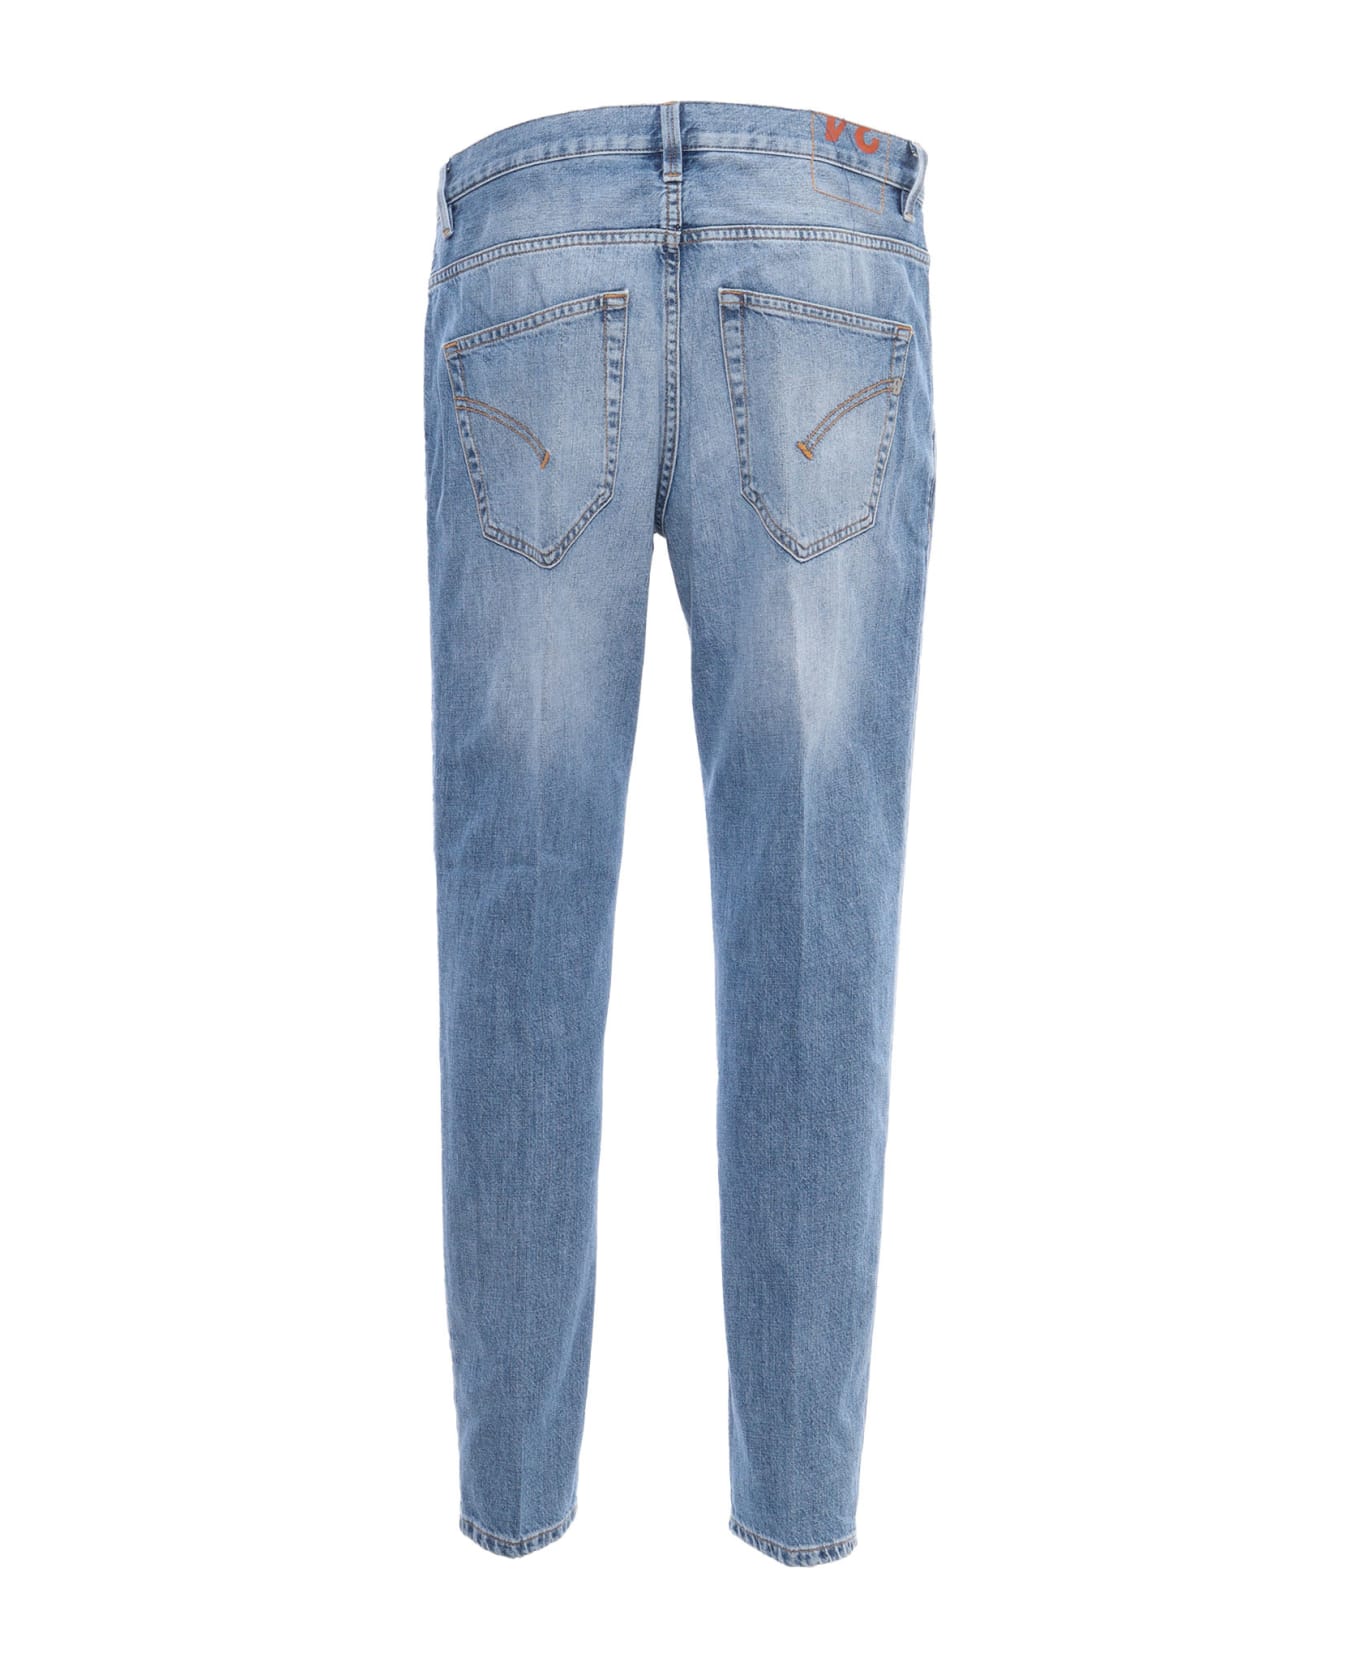 Dondup Washed Effect Jeans - Blu